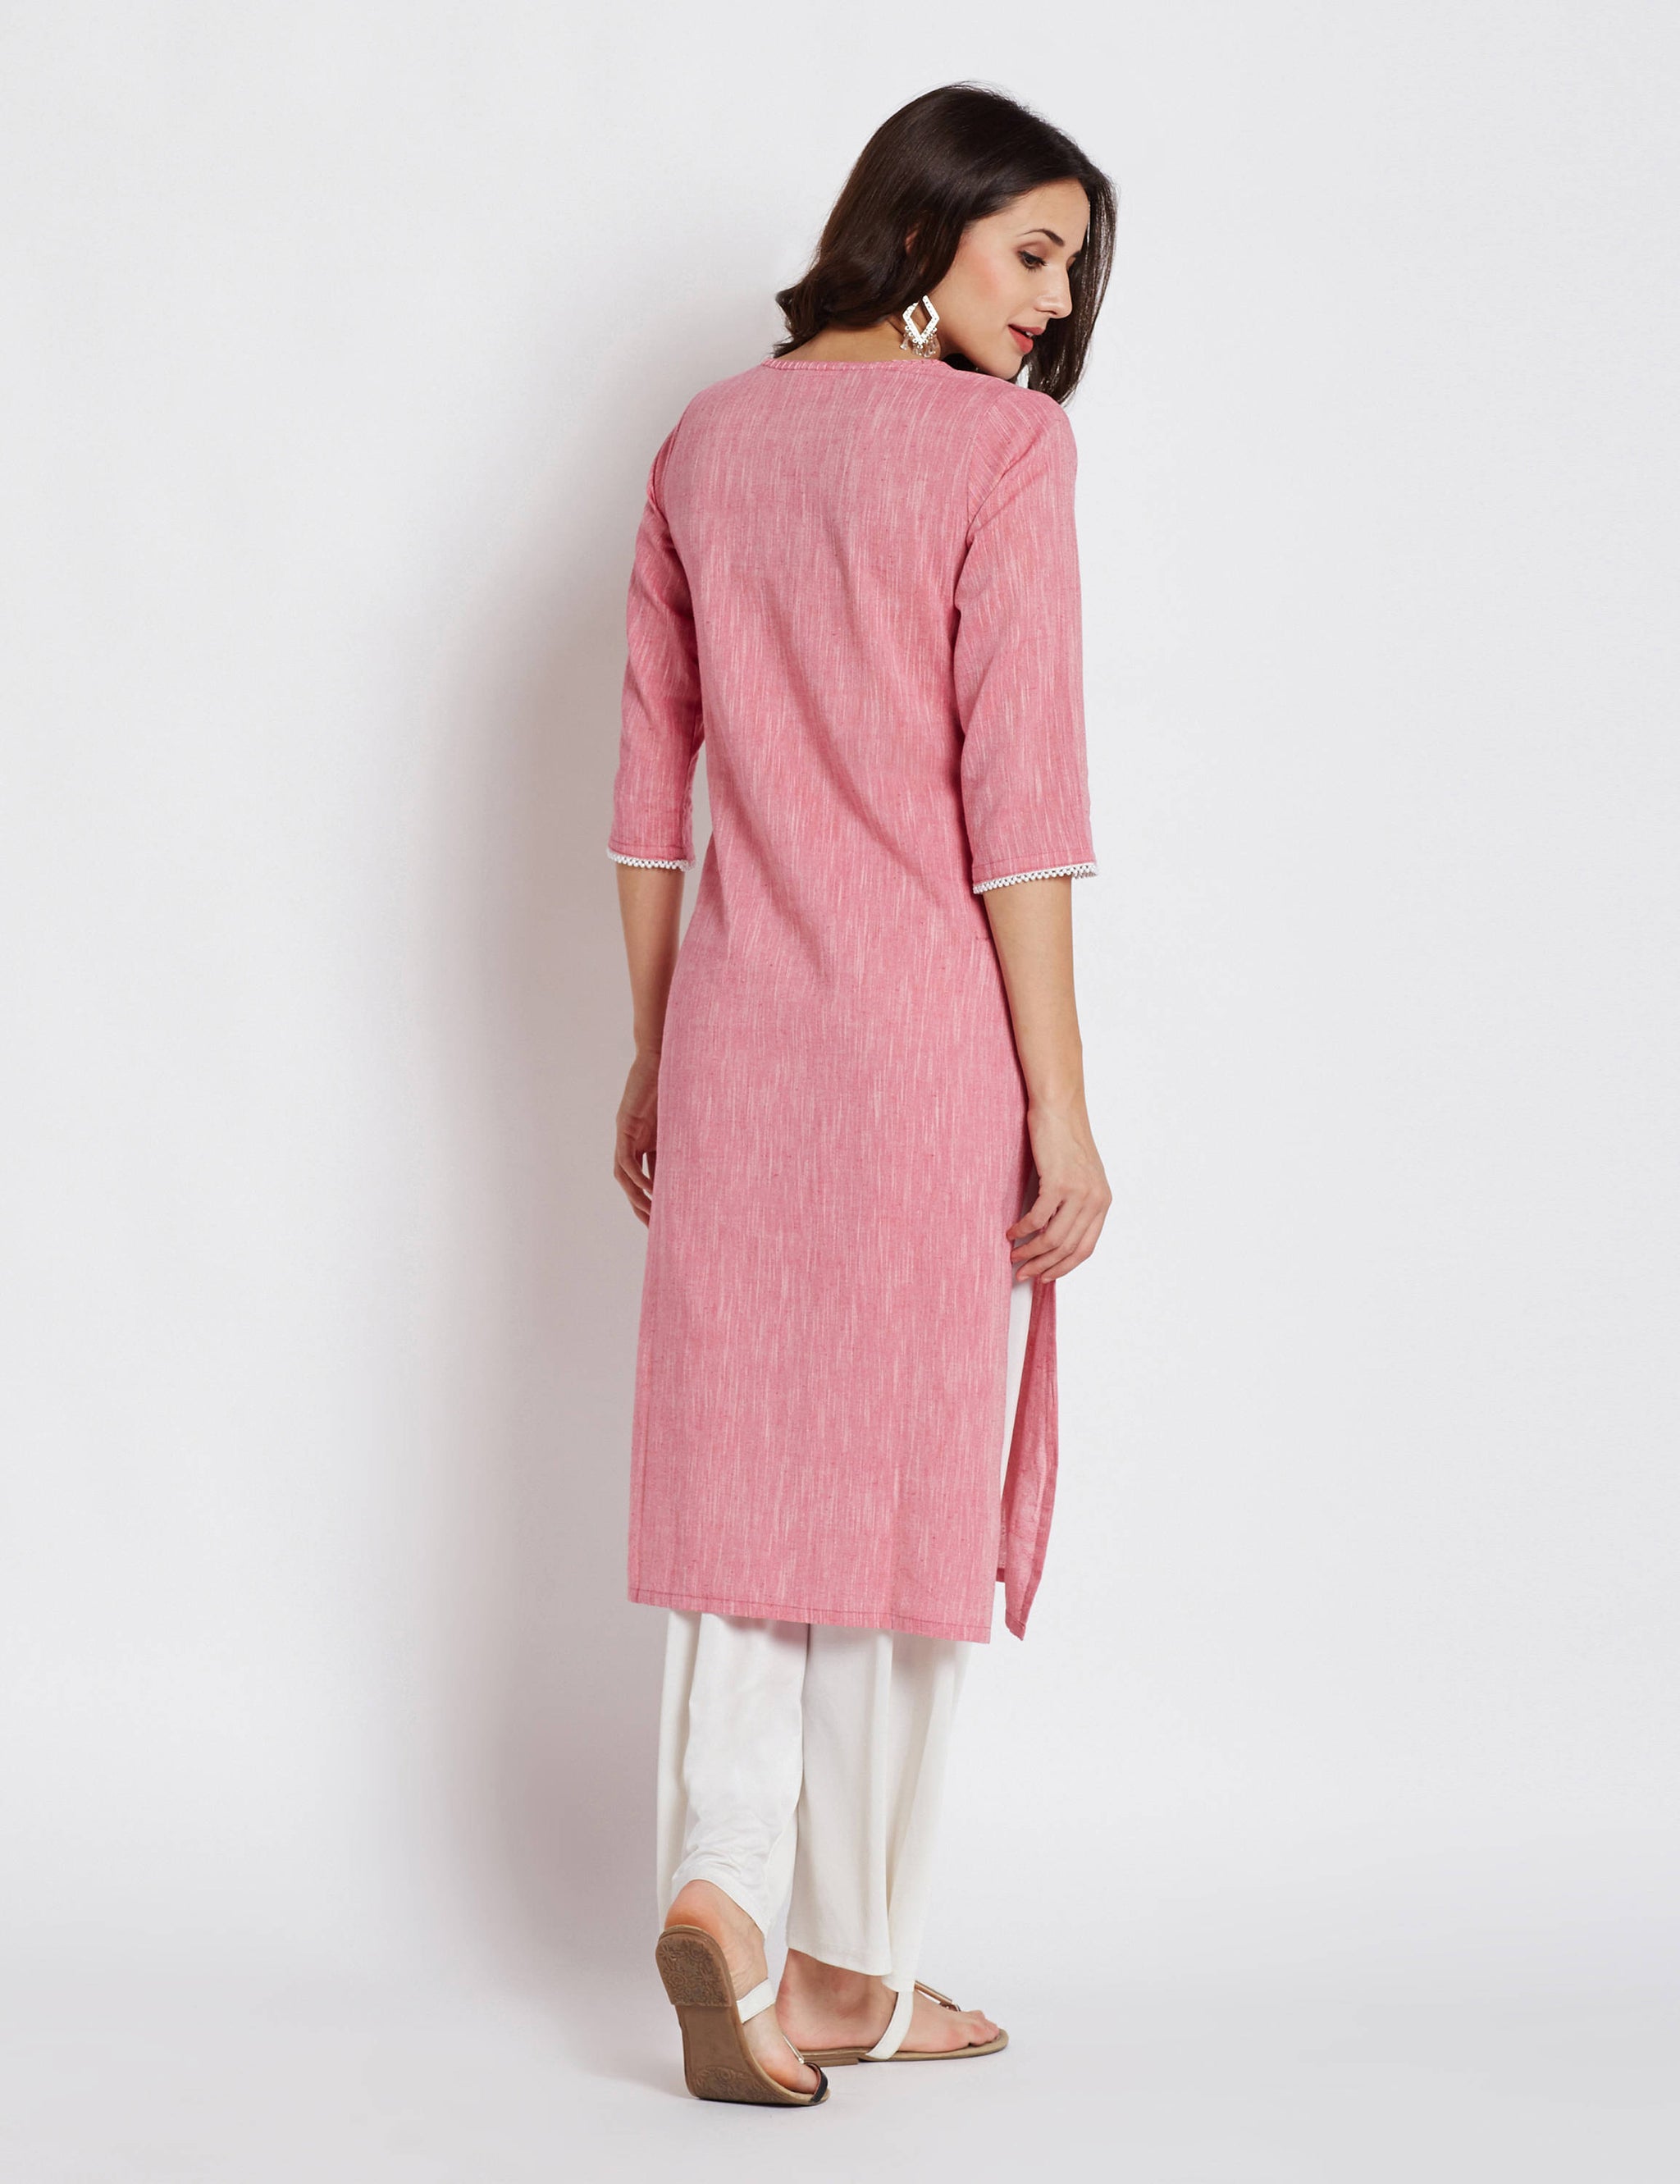 Indian ethnic long kurta with pocket in soft pink colour with beads border detailing